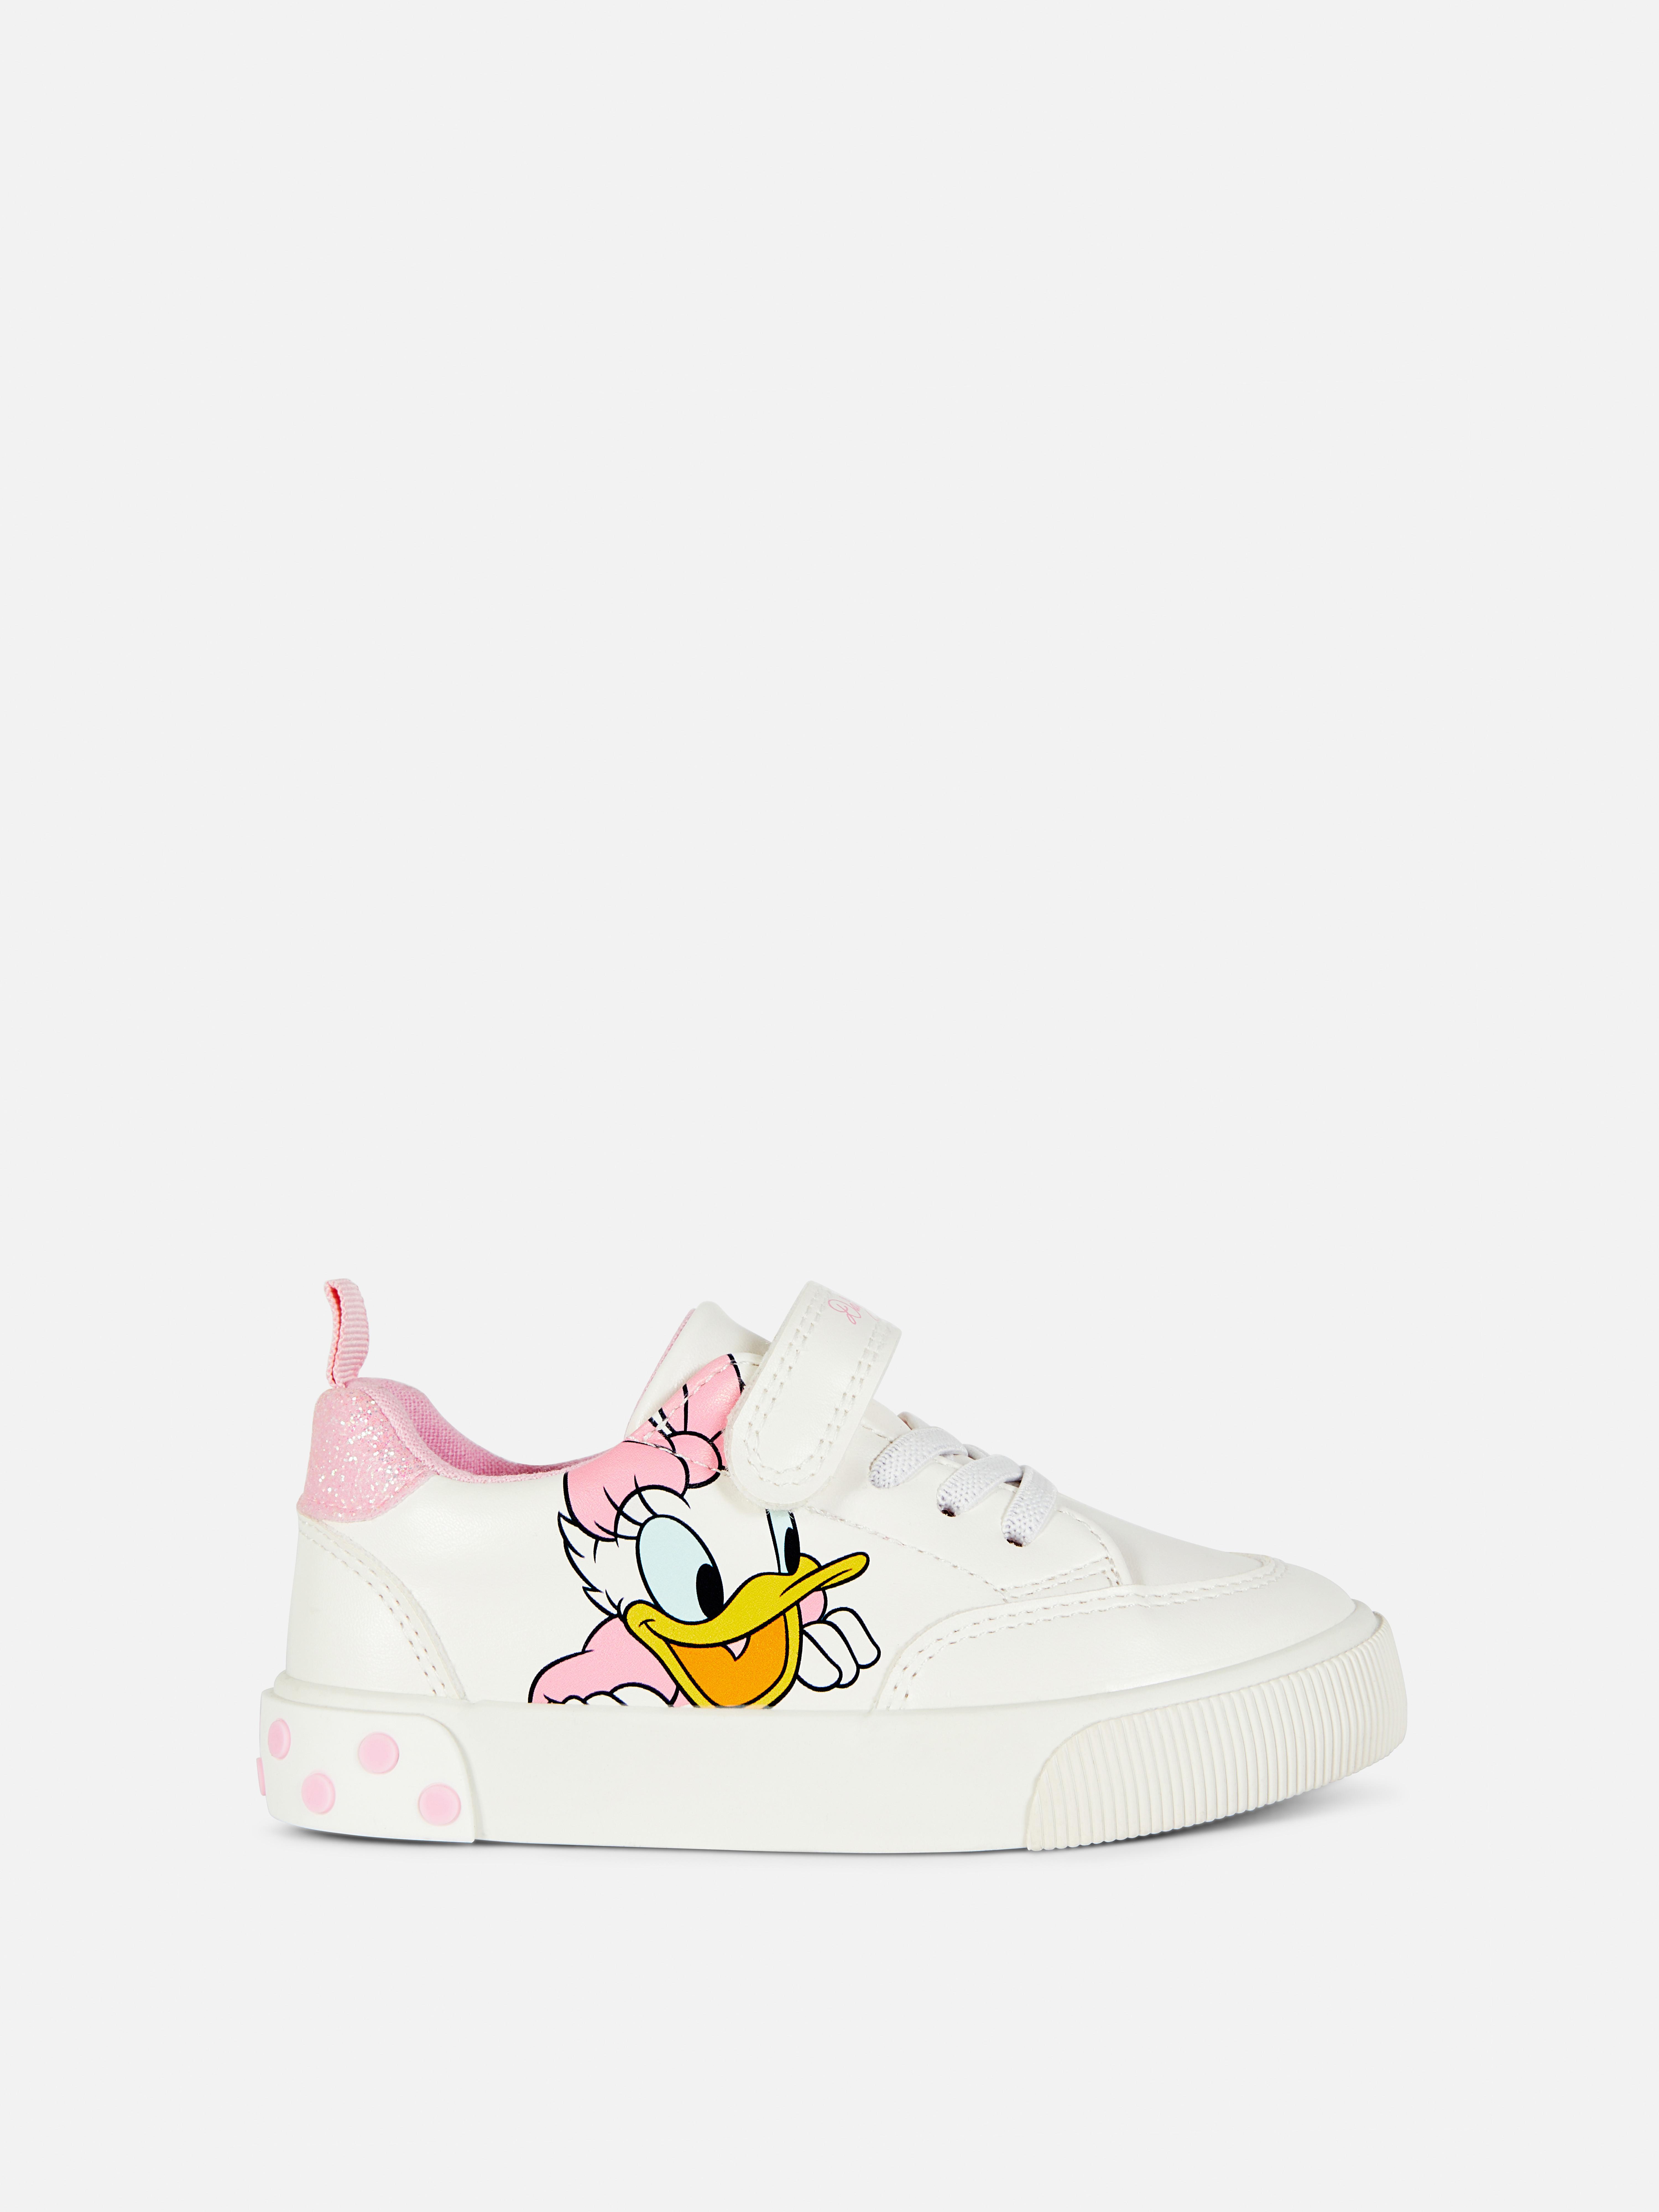 Disney’s Minnie Mouse and Daisy Duck Sneakers